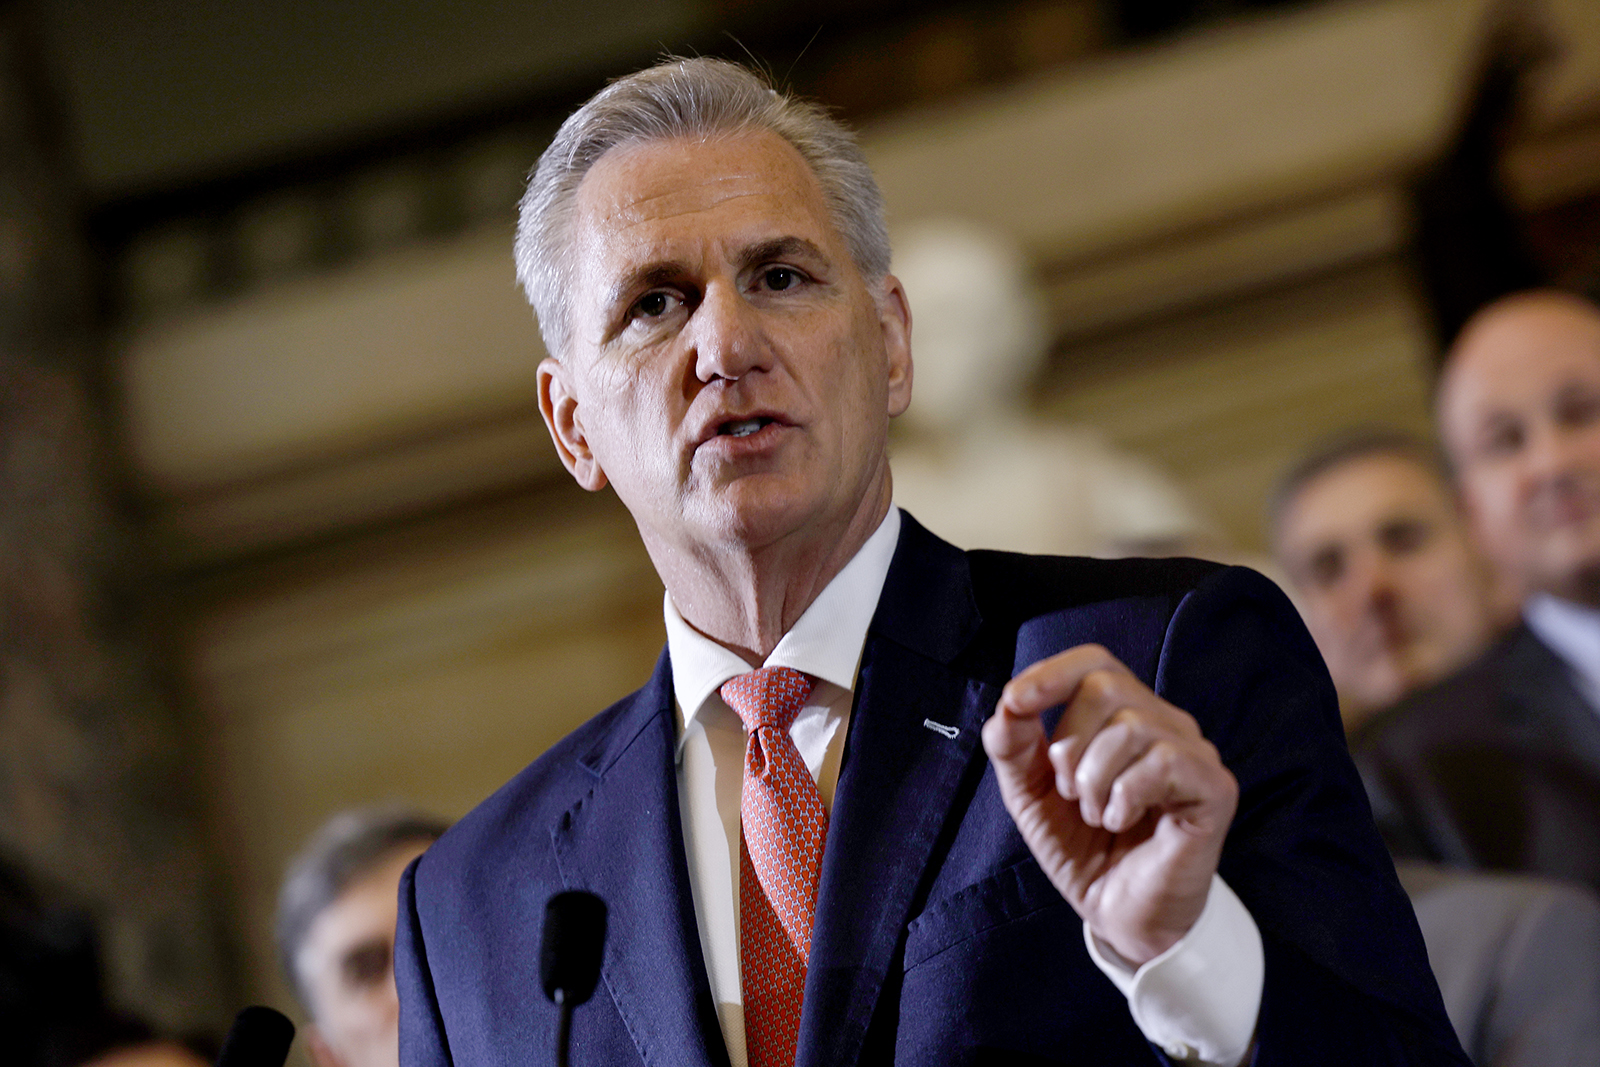 U.S. Speaker of the House Kevin McCarthy at the U.S. Capitol building on March 10.